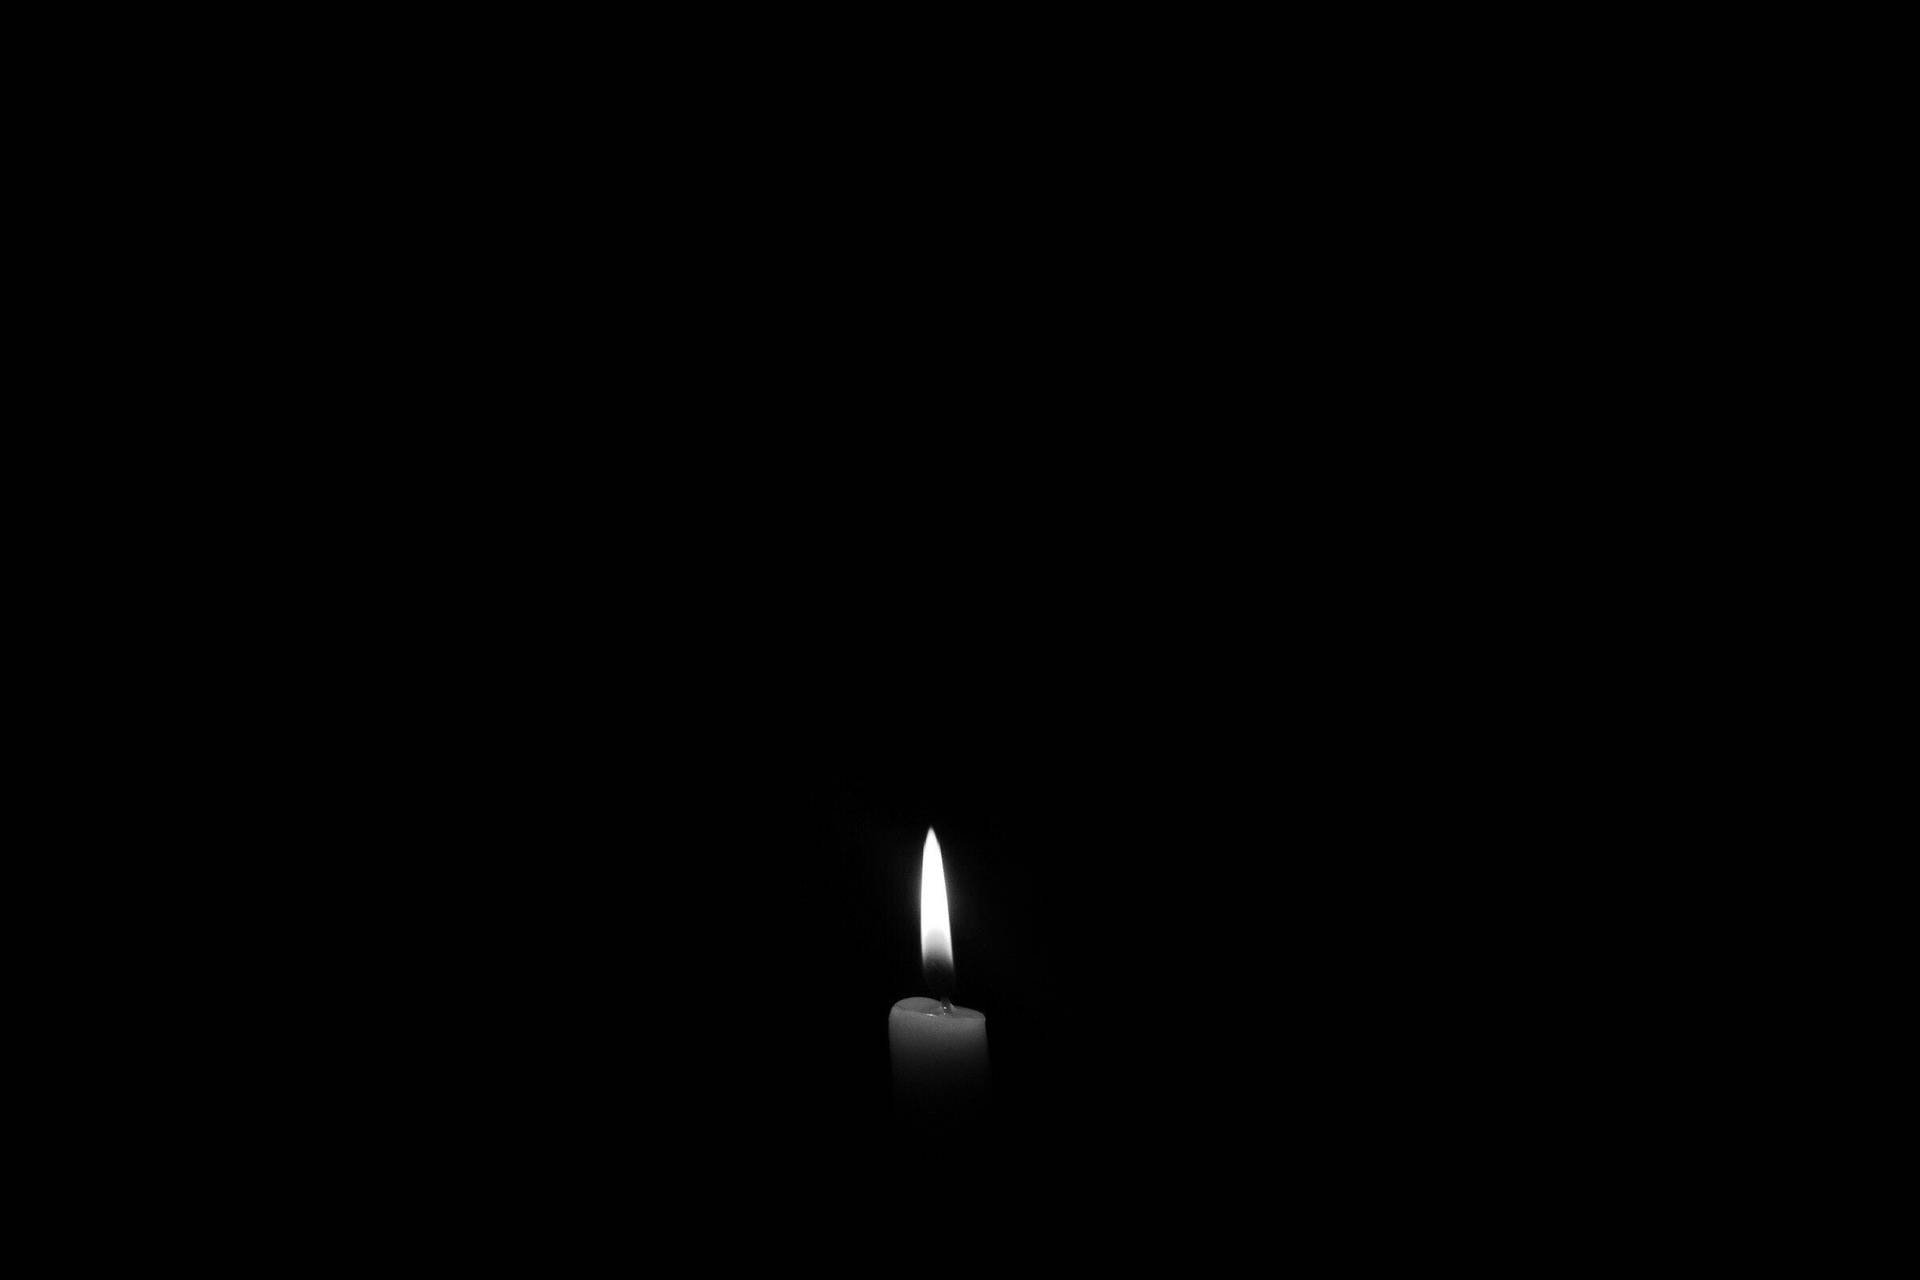 White Lit Candle Over Dark Screen Wallpaper